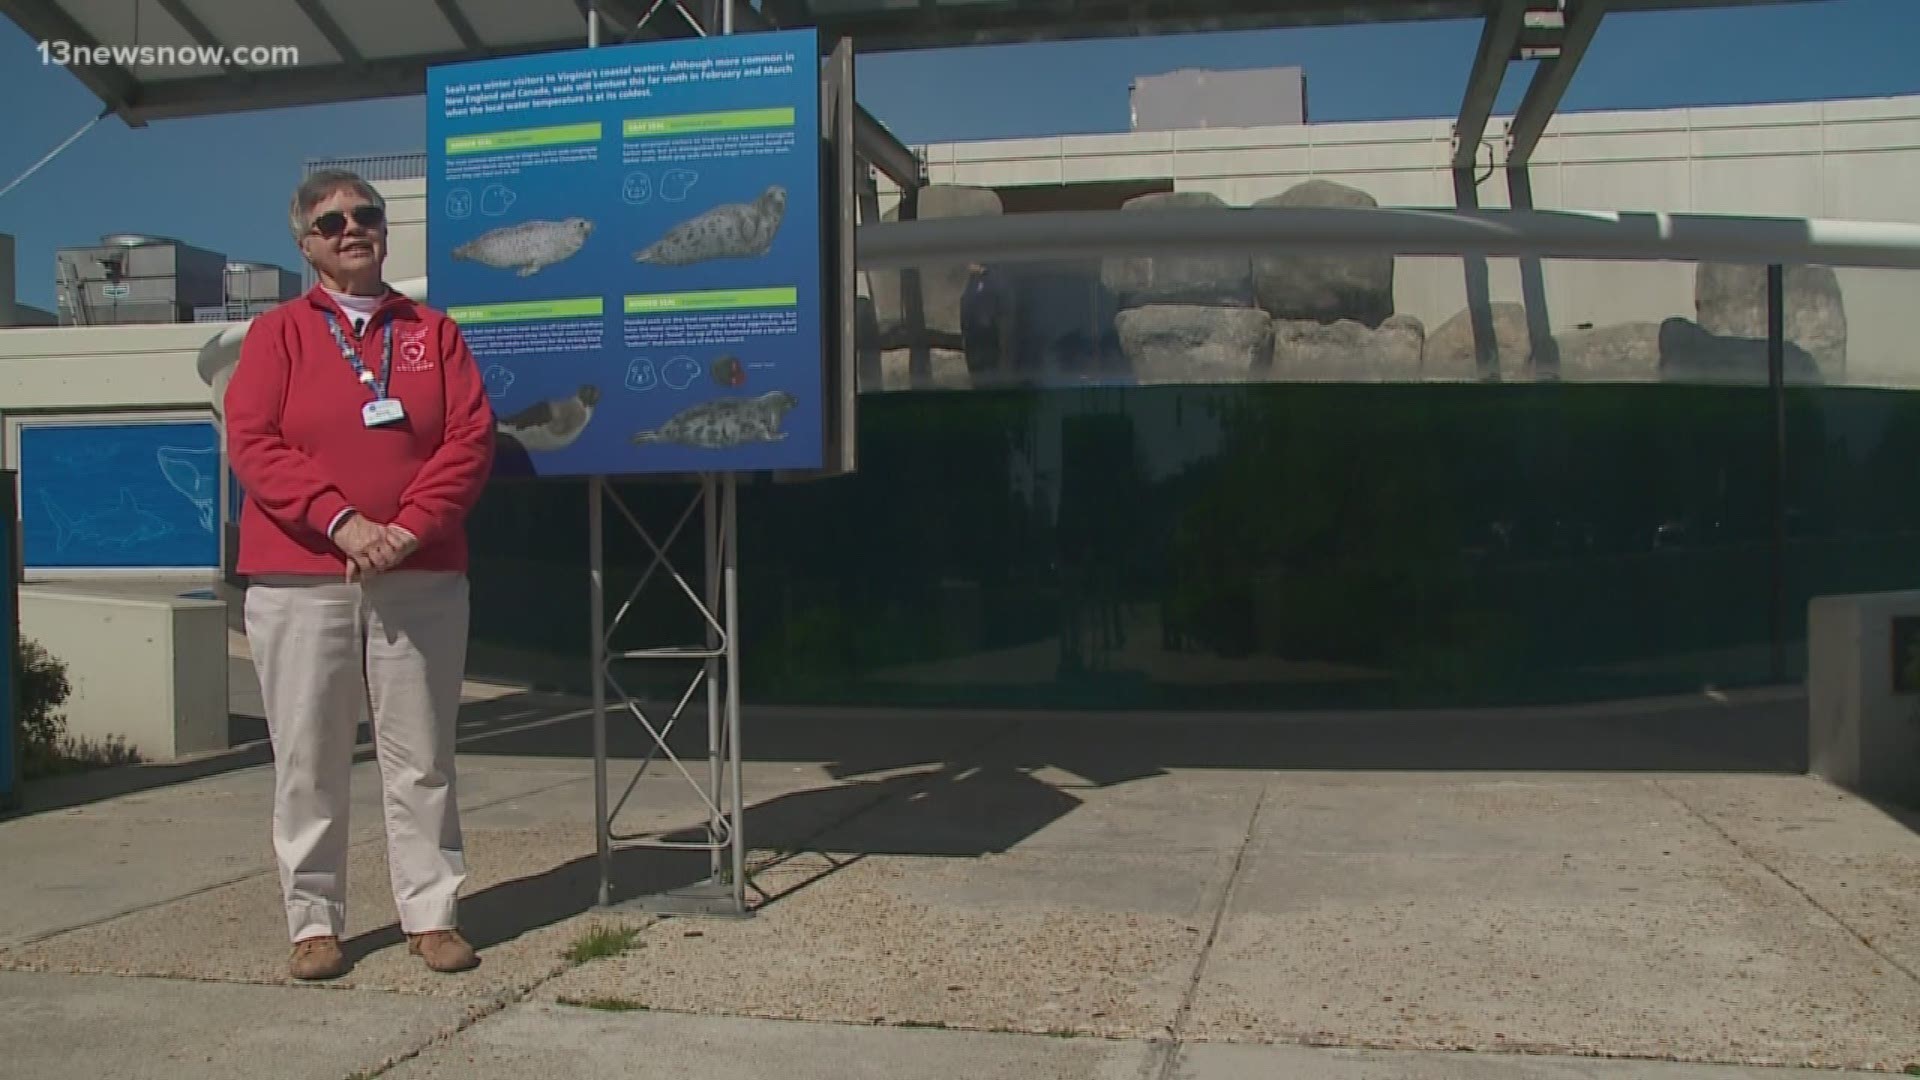 Sandy Wood has racked up thousands of volunteer hours over three decades at The Virginia Aquarium & Marine Science Center.